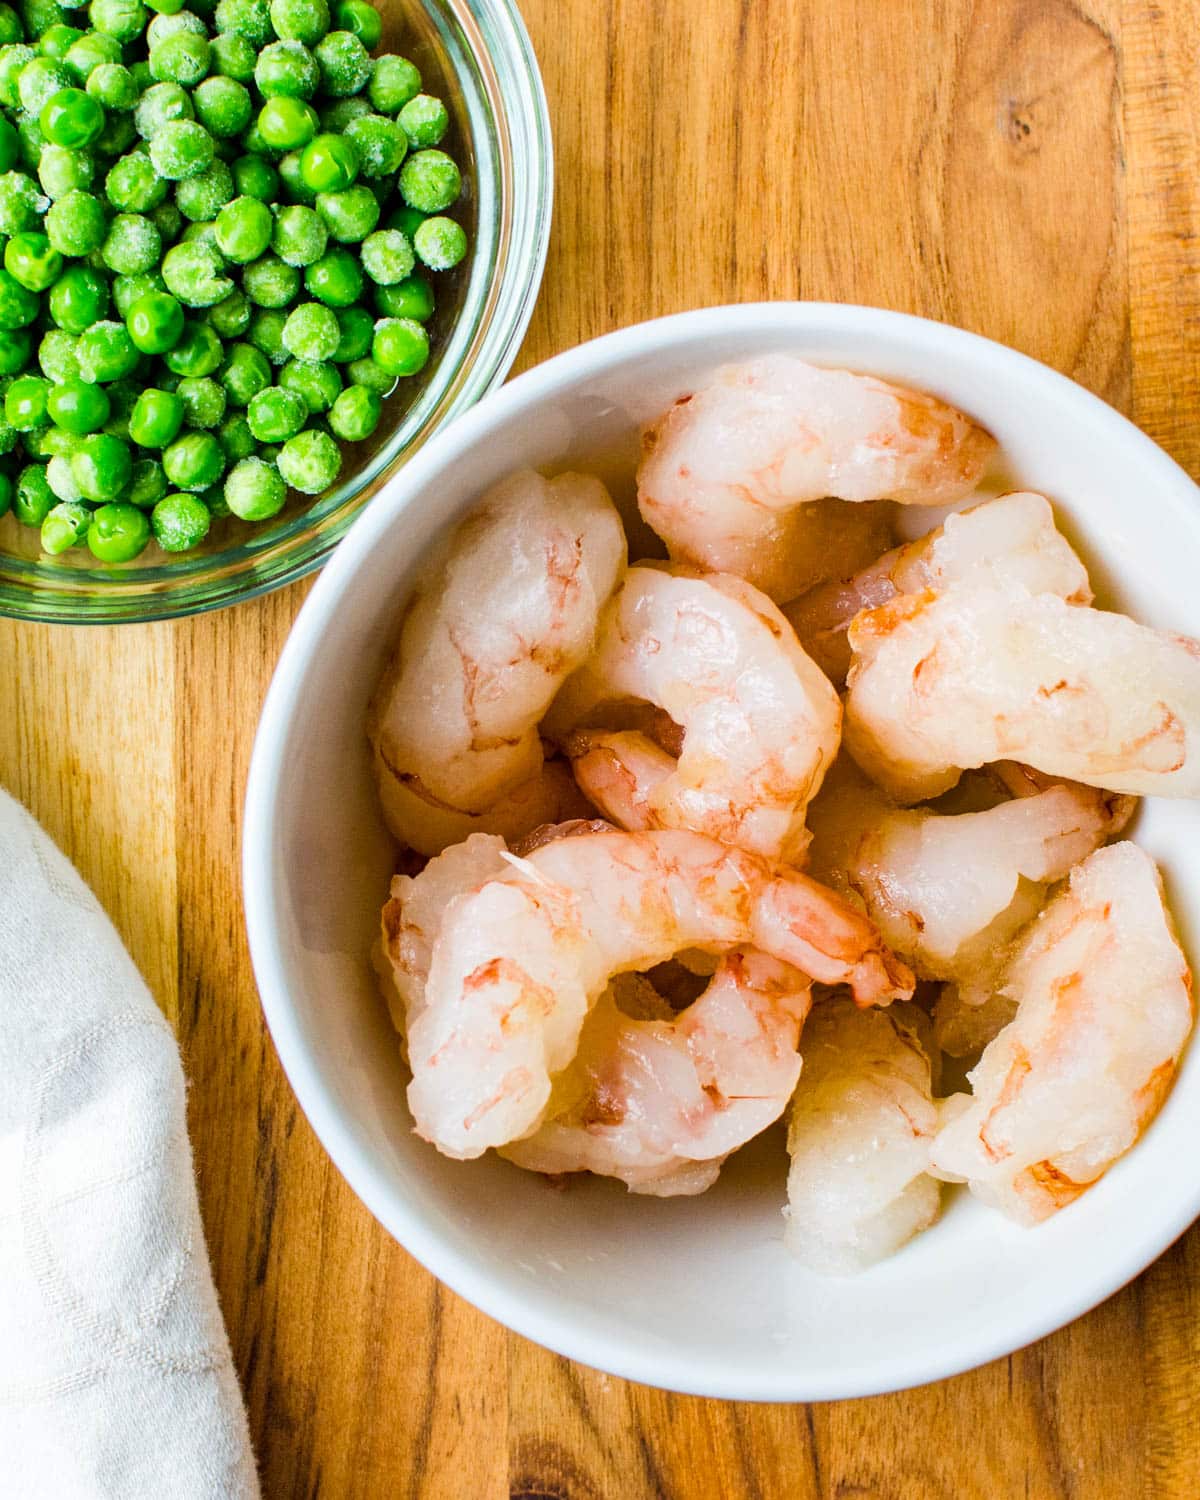 Peeled and deveined shrimp and a bowl of frozen peas.